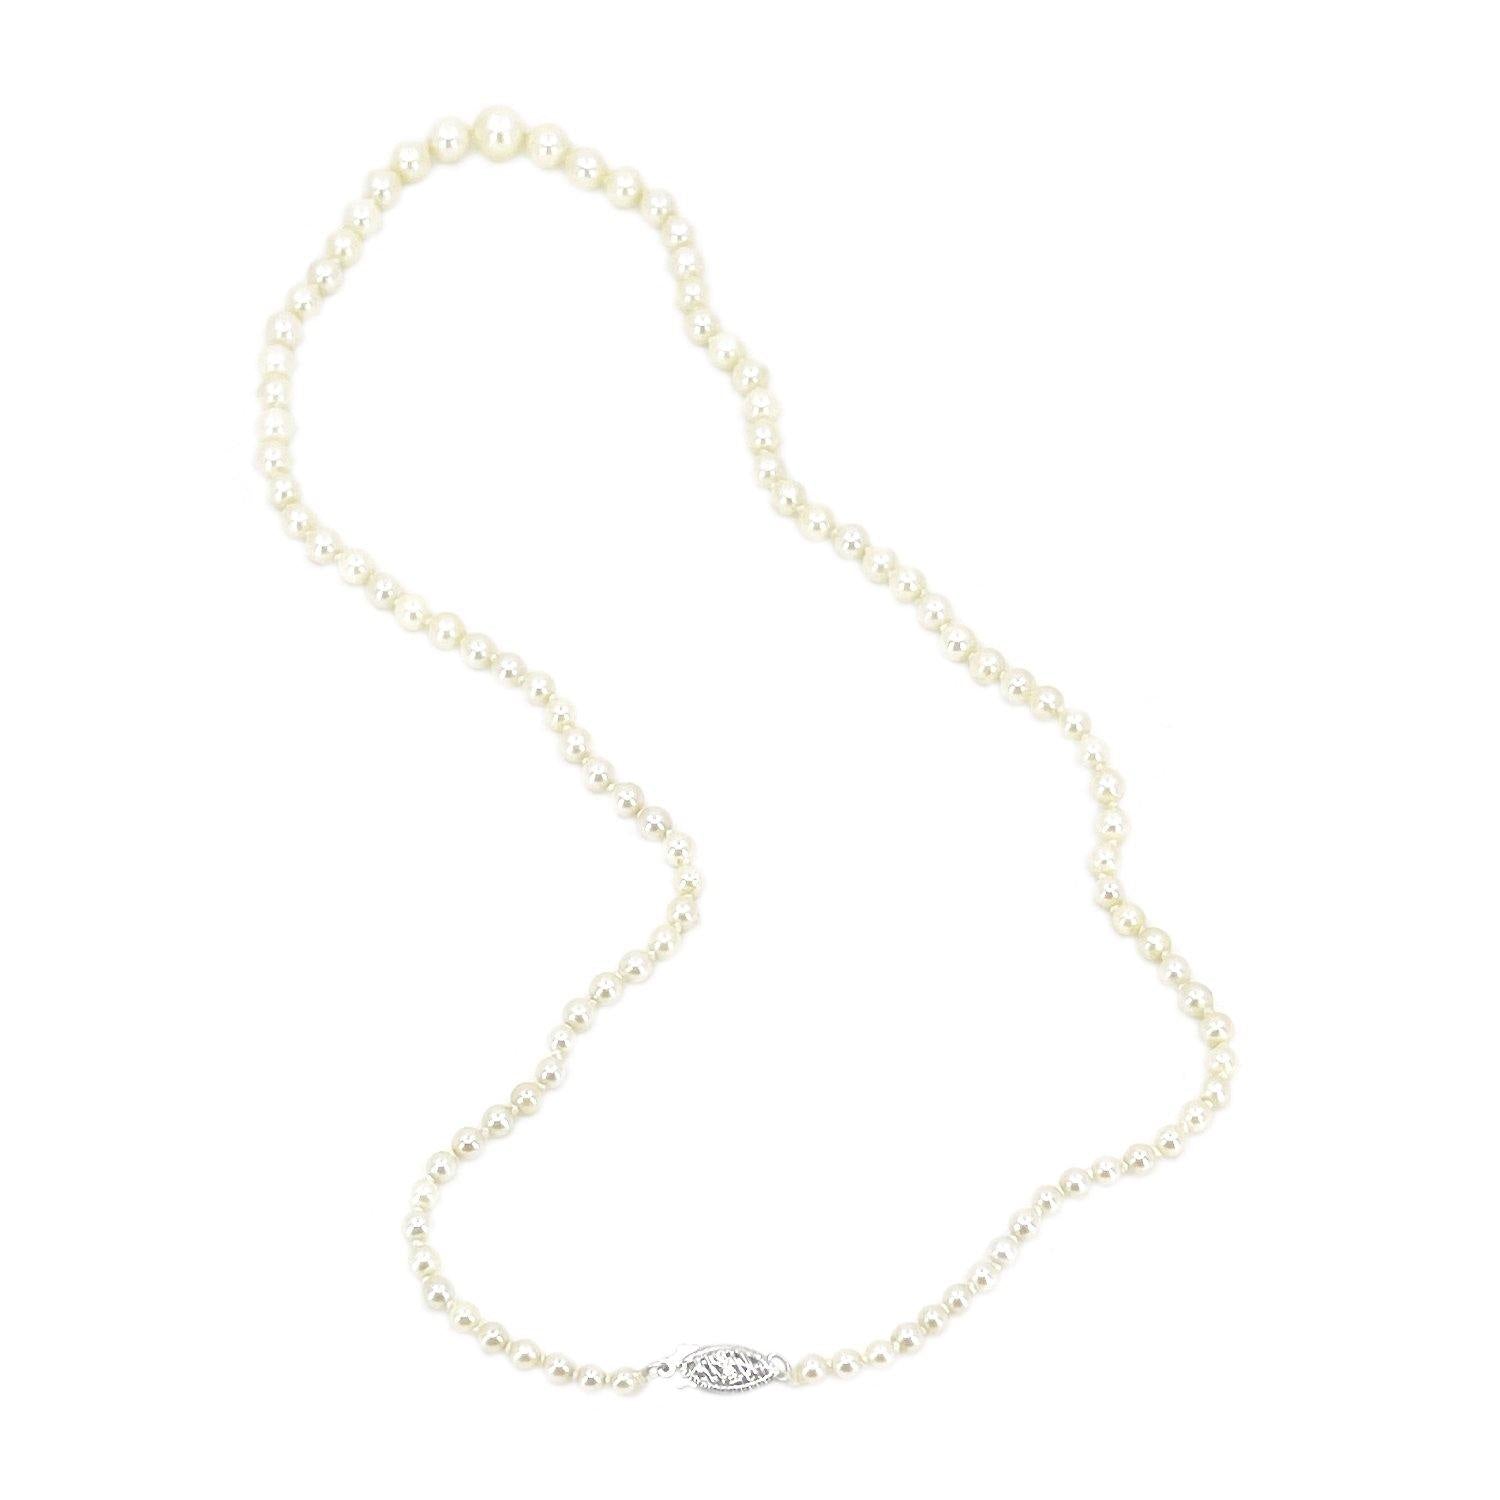 Retro Graduated Japanese Saltwater Cultured Akoya Pearl Filigree Necklace - 14K White Gold 20.25 Inch